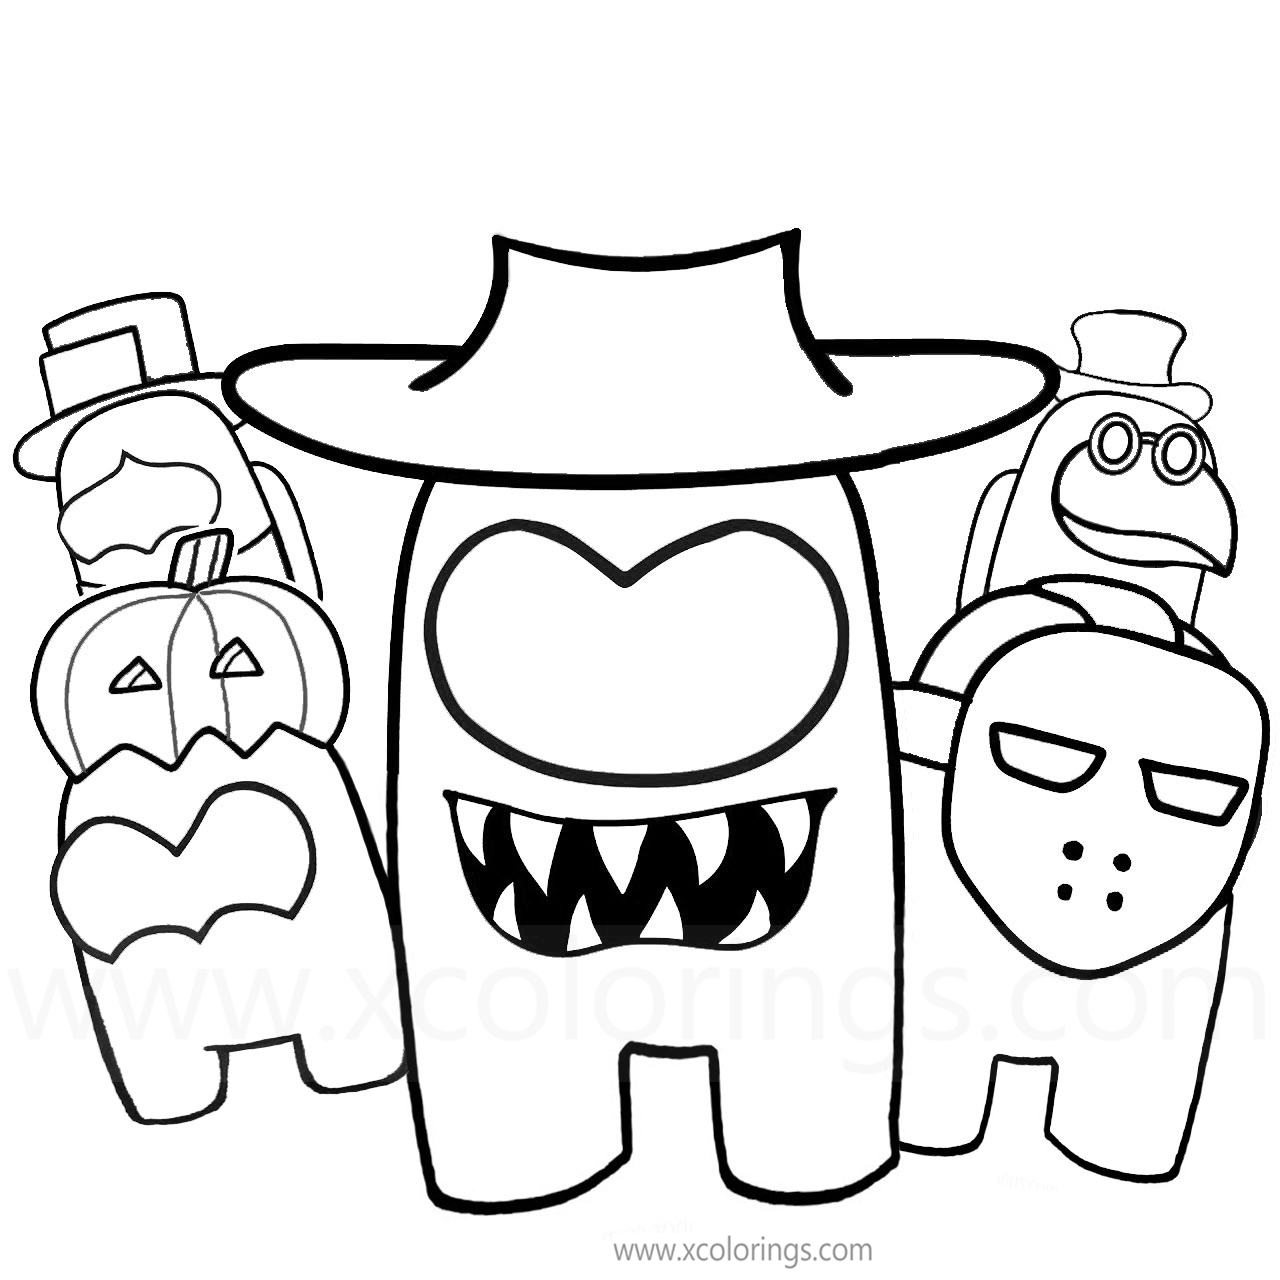 Among Us Halloween Coloring Pages Printable   XColorings.com